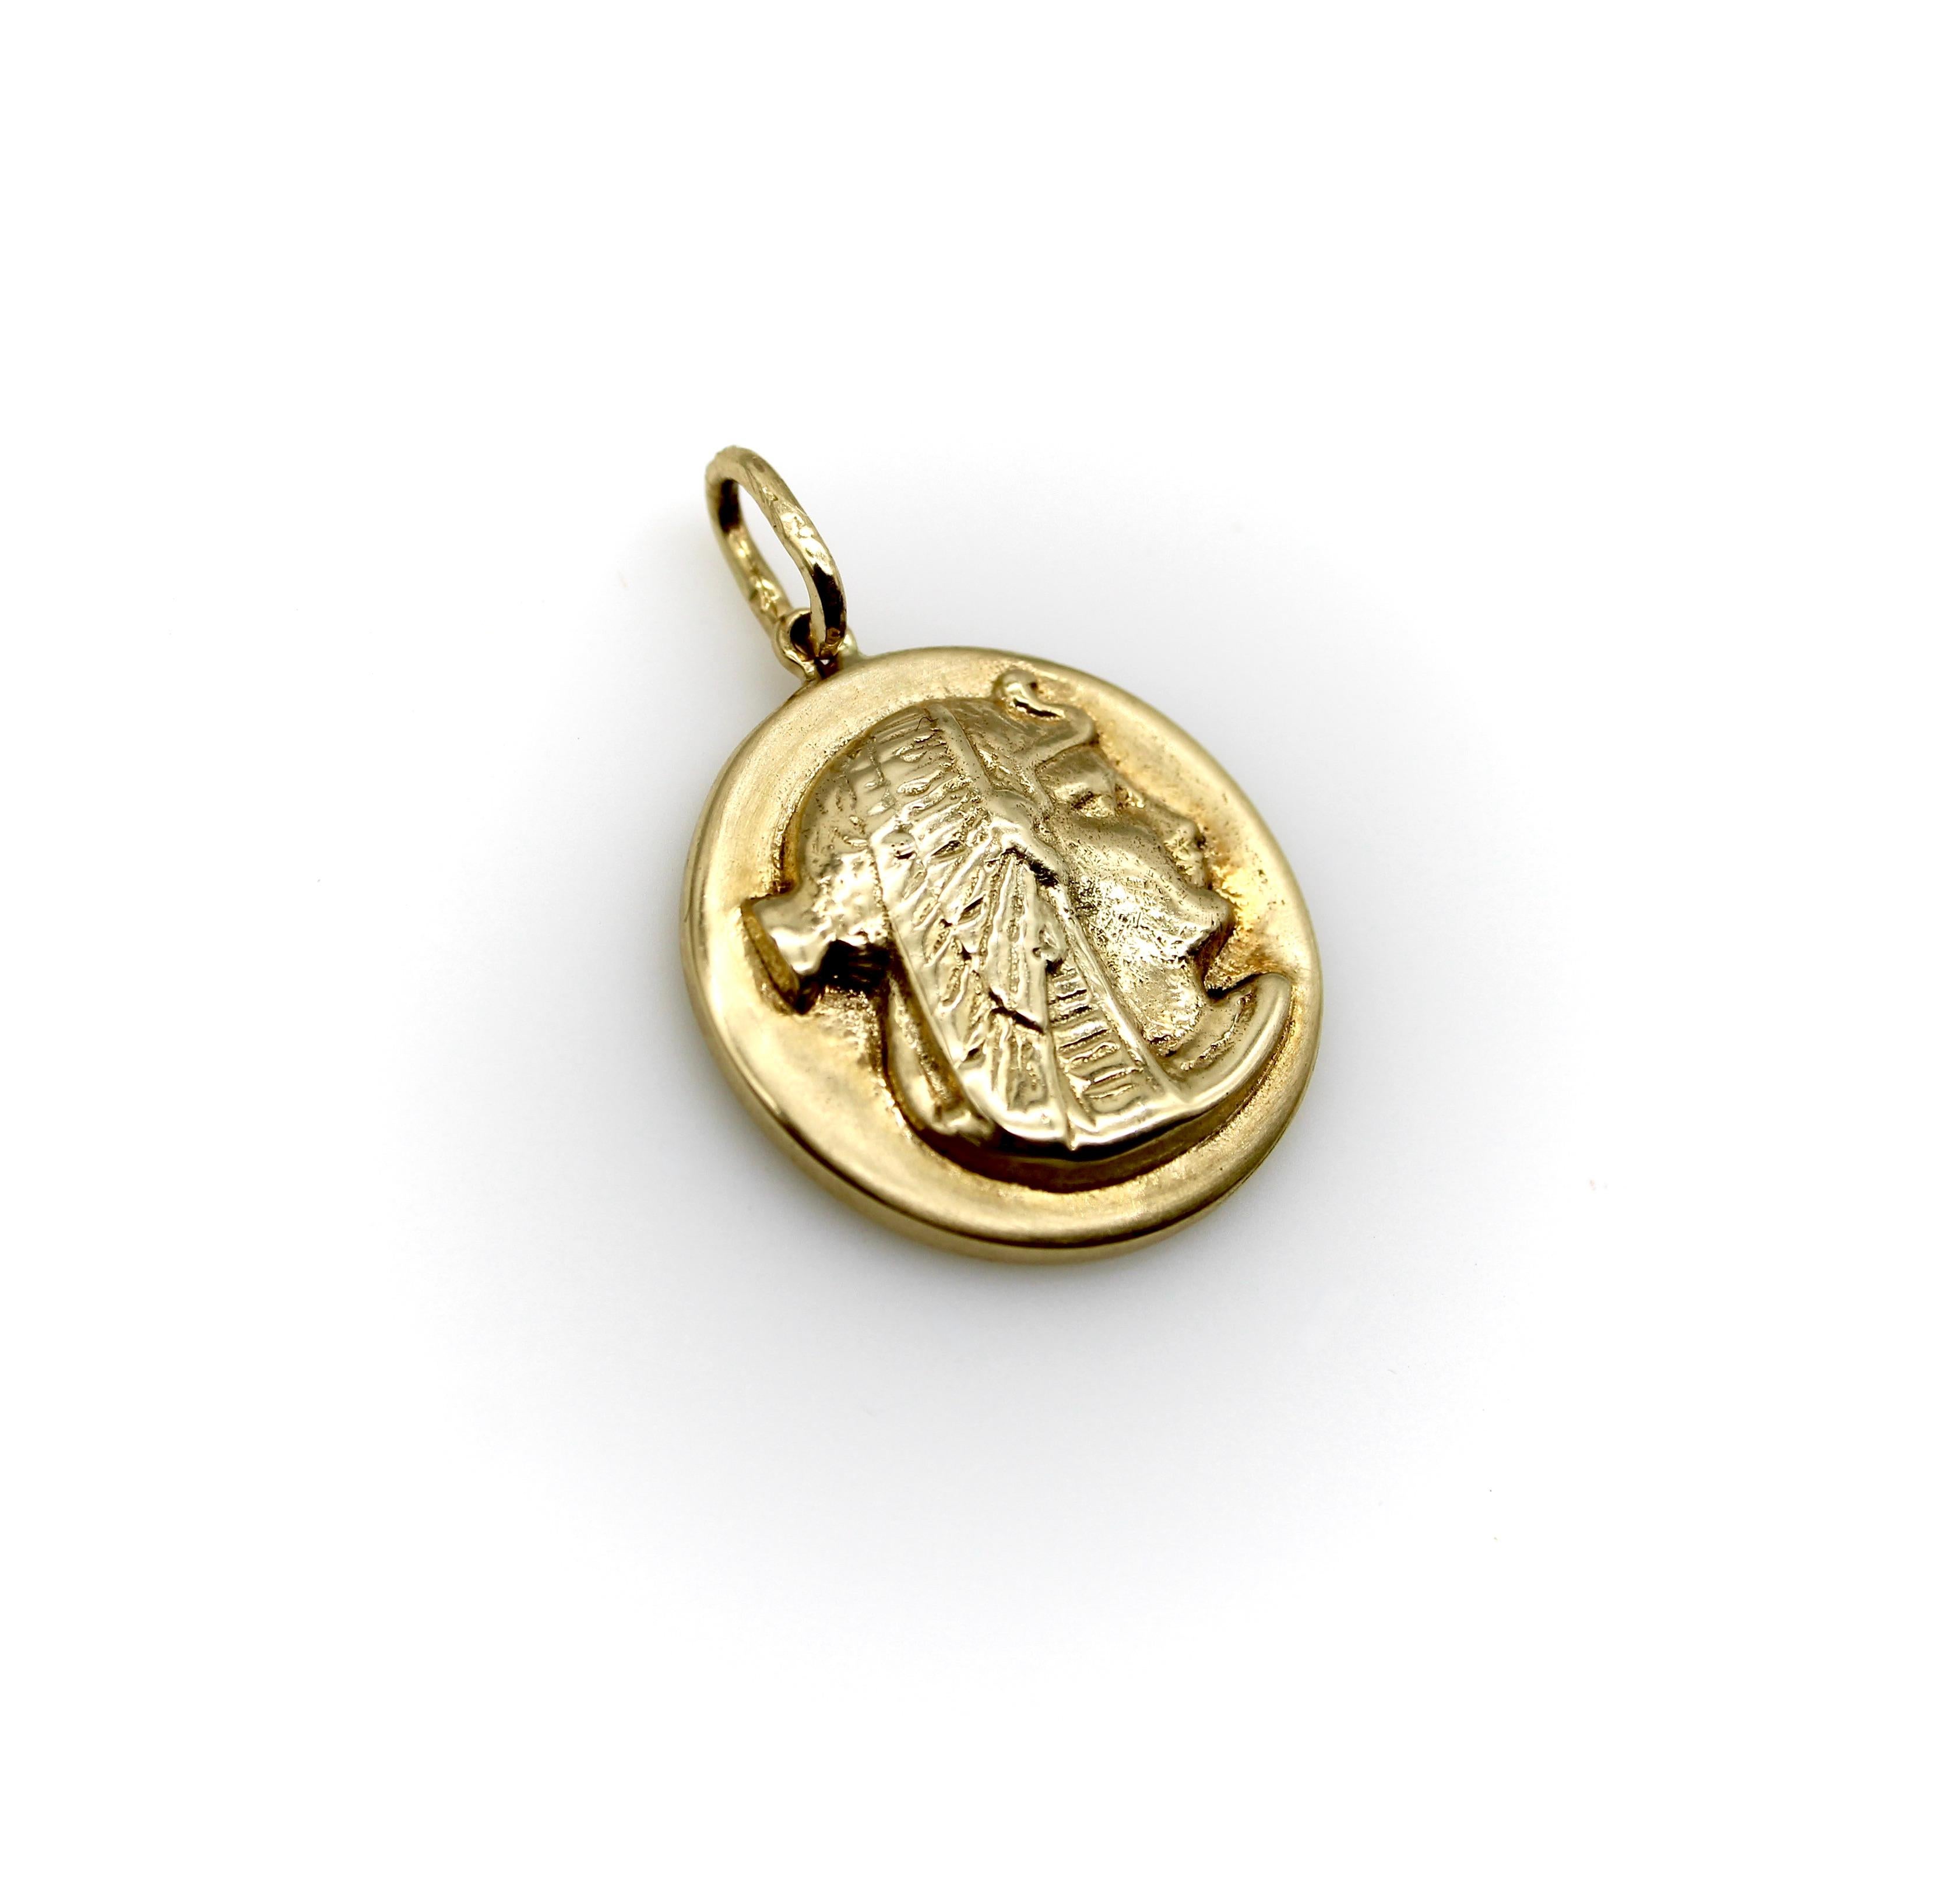 Part of Kirsten’s Corner’s Cute as a Button series, this 14k gold charm was cast from a Victorian era button. It features a side profile view of the goddess Nekhbet wearing her traditional vulture headdress. The charm is medallion-shaped with a nice